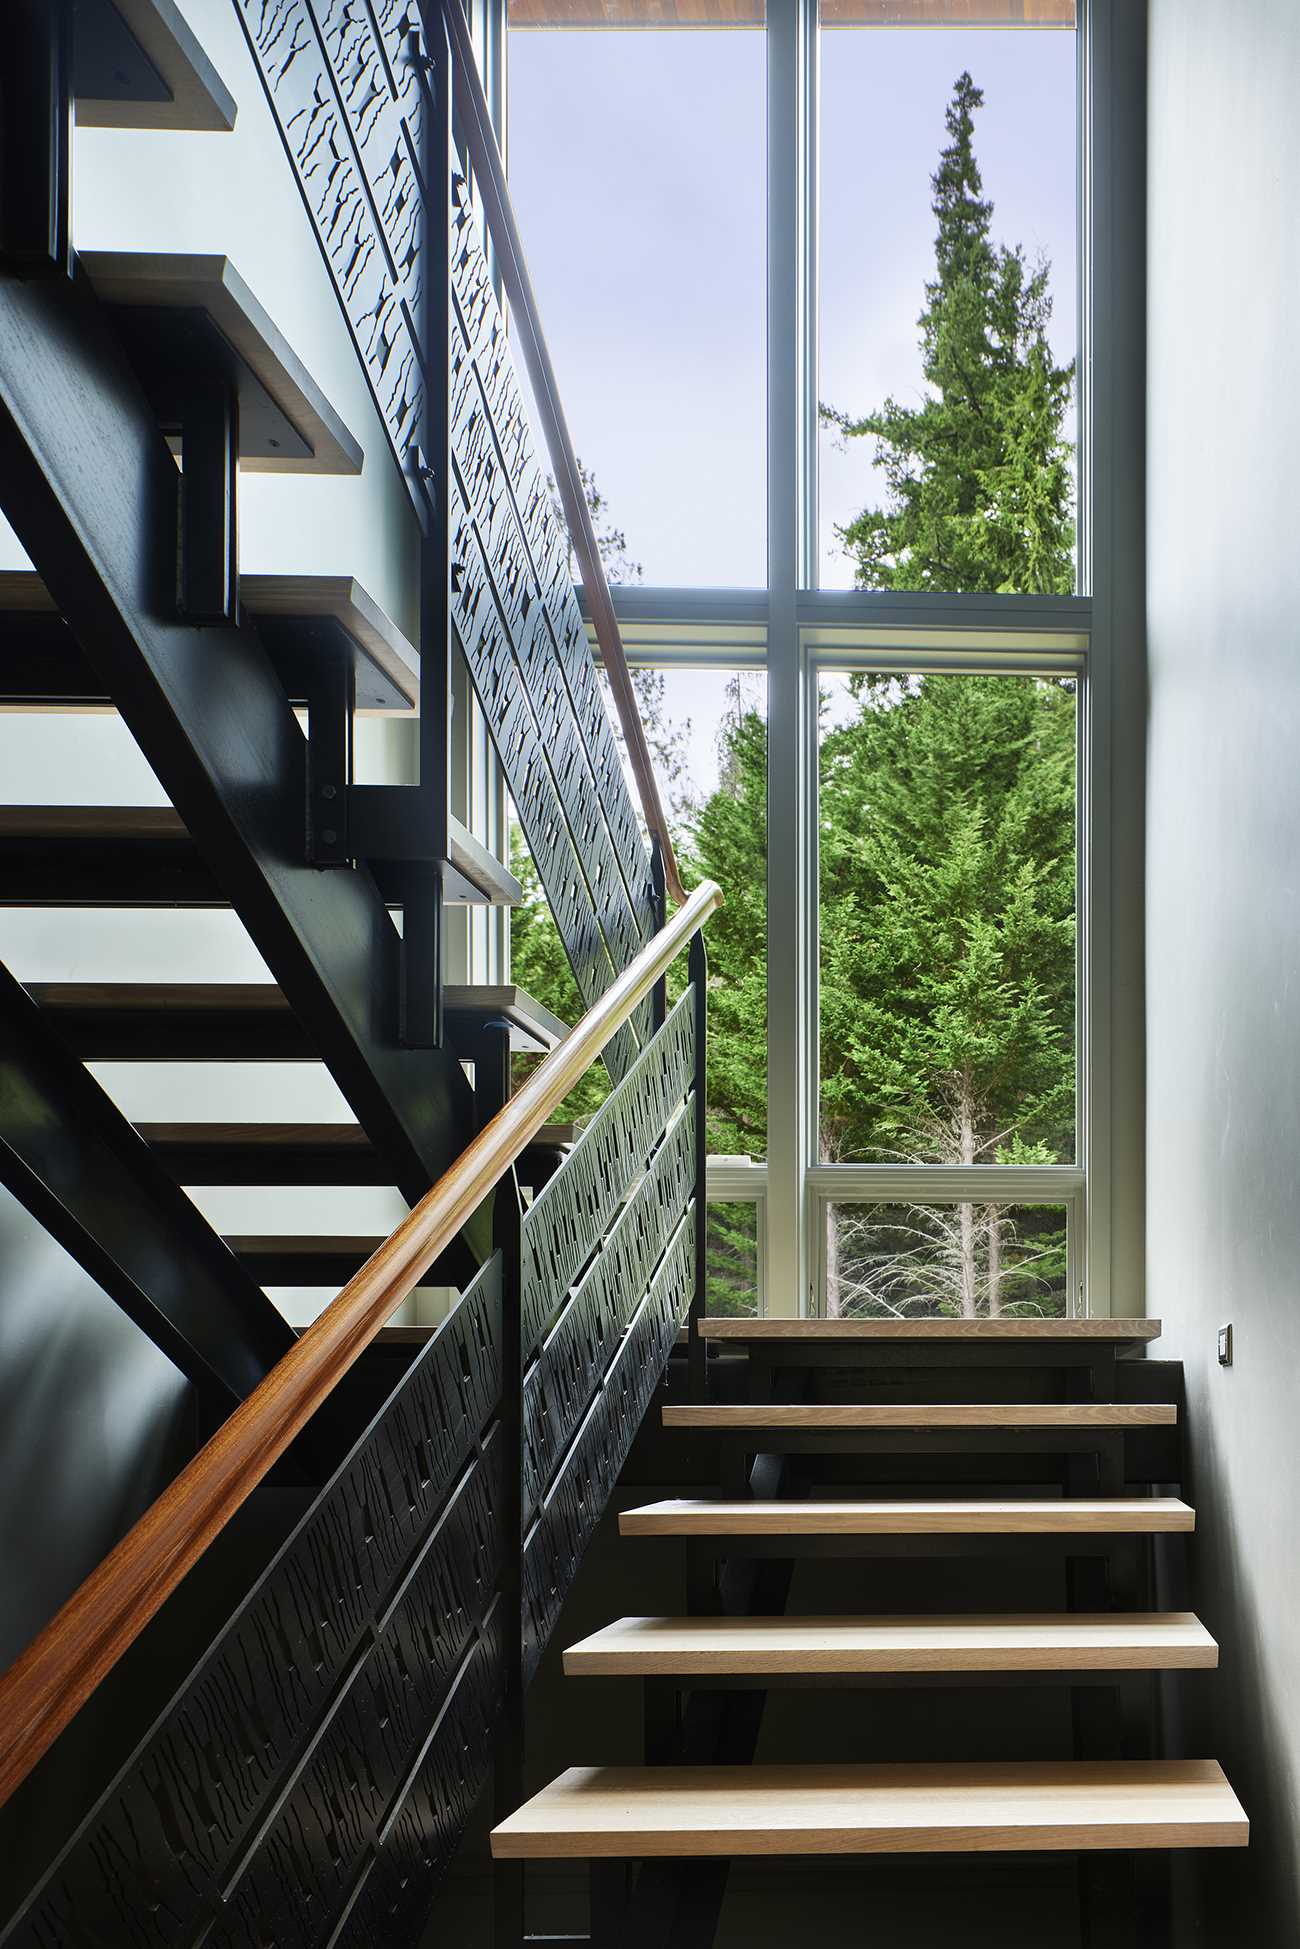 The spare steel and wood main stair is positioned to take advantage of the view through the double-height windows, which also provide natural light to the interior.